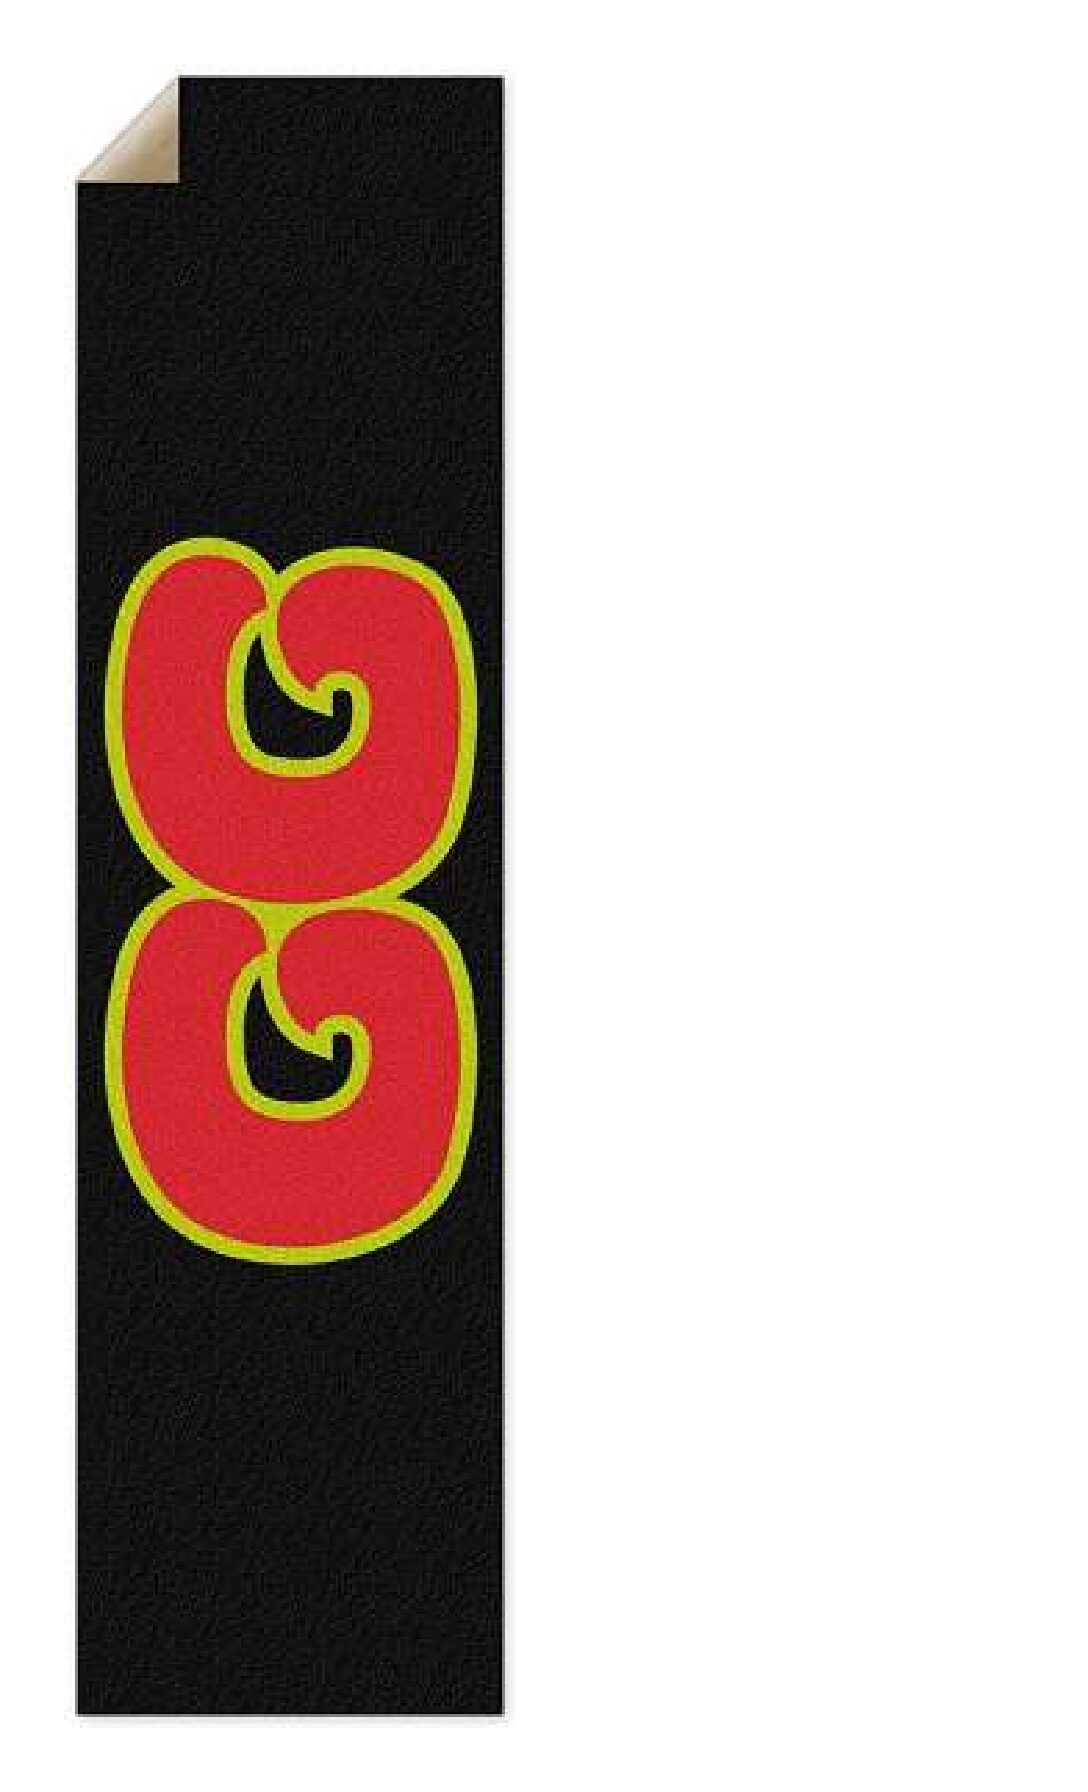 GaiGan GG Grip Tape for your deck